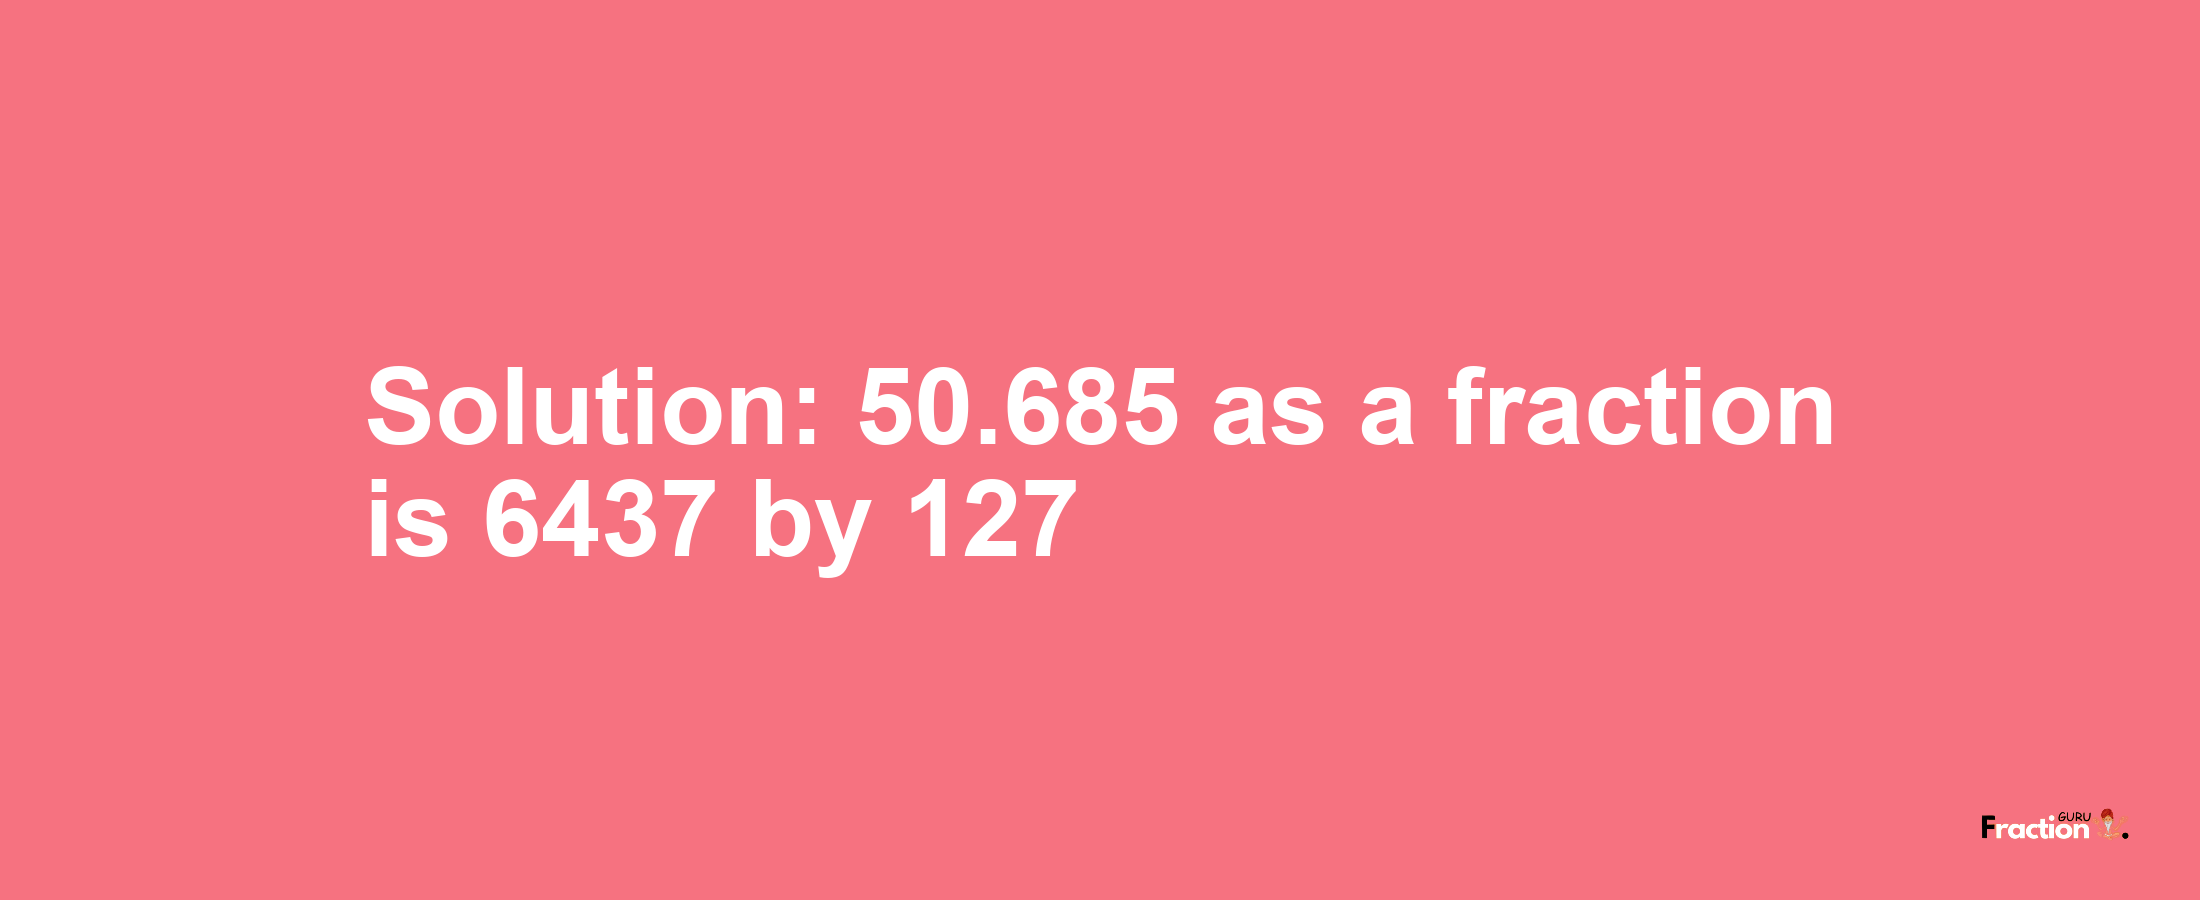 Solution:50.685 as a fraction is 6437/127